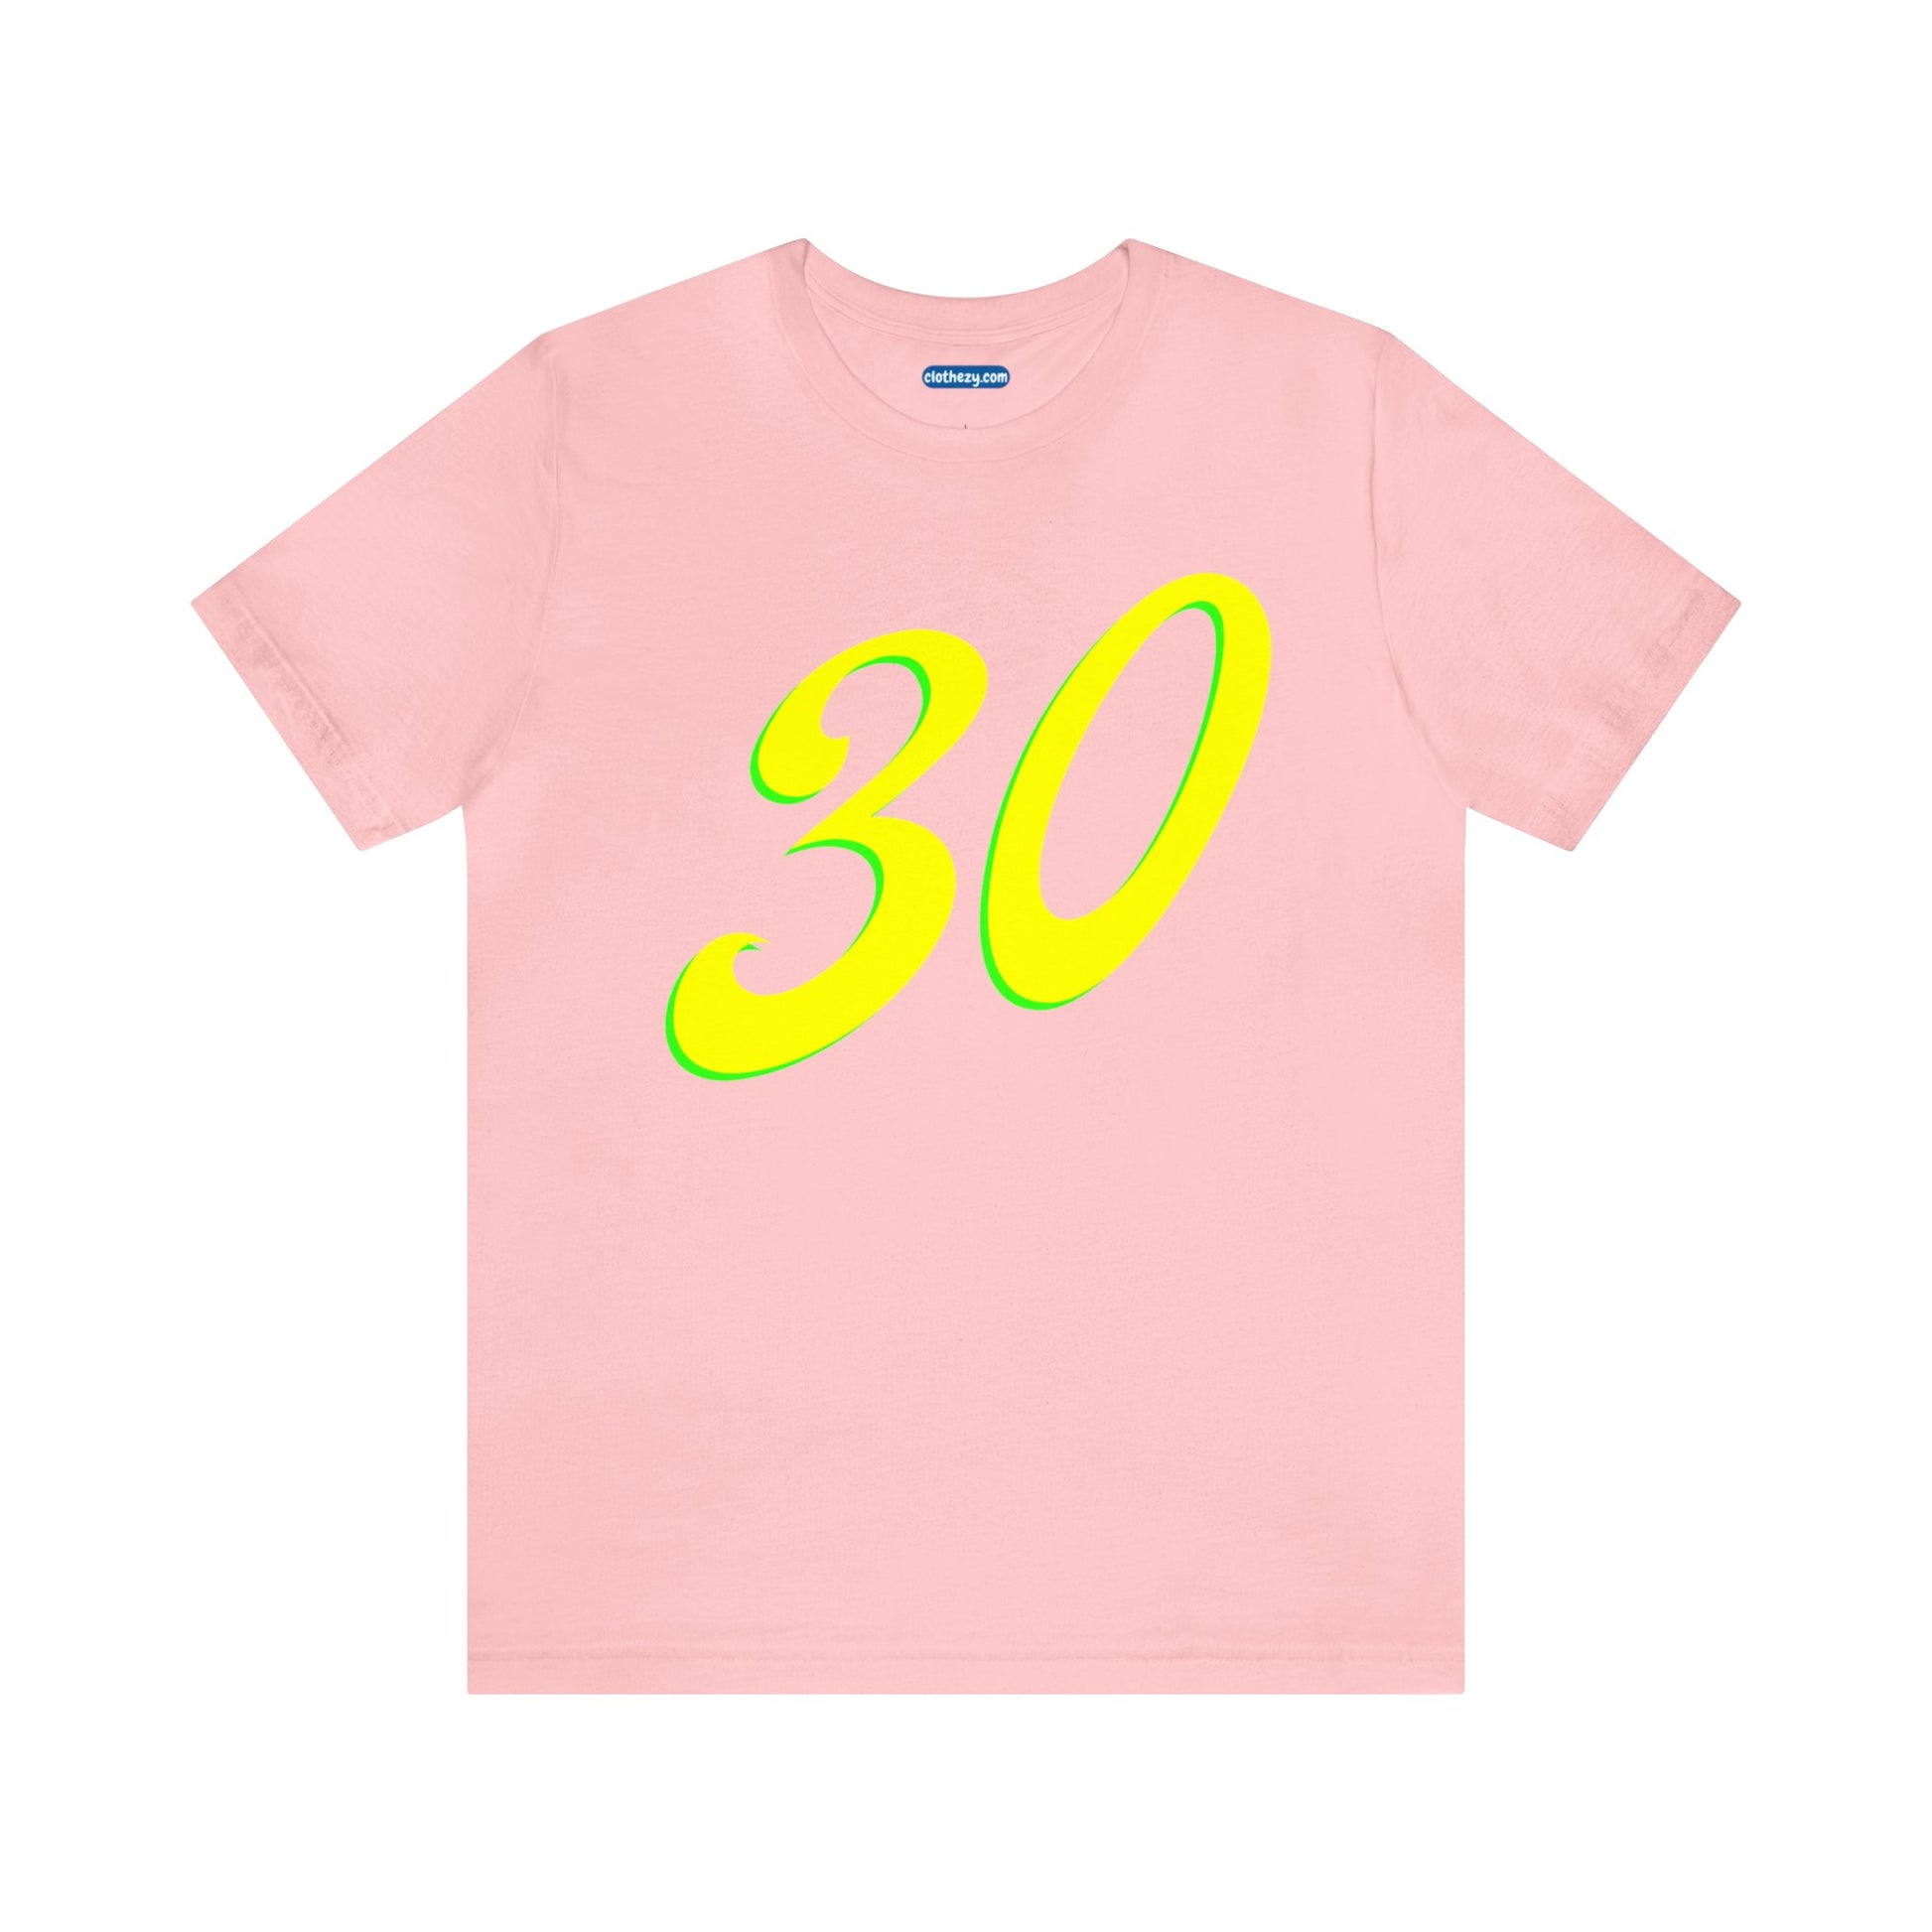 Number 30 Design - Soft Cotton Tee for birthdays and celebrations, Gift for friends and family, Multiple Options by clothezy.com in Pink Size Small - Buy Now